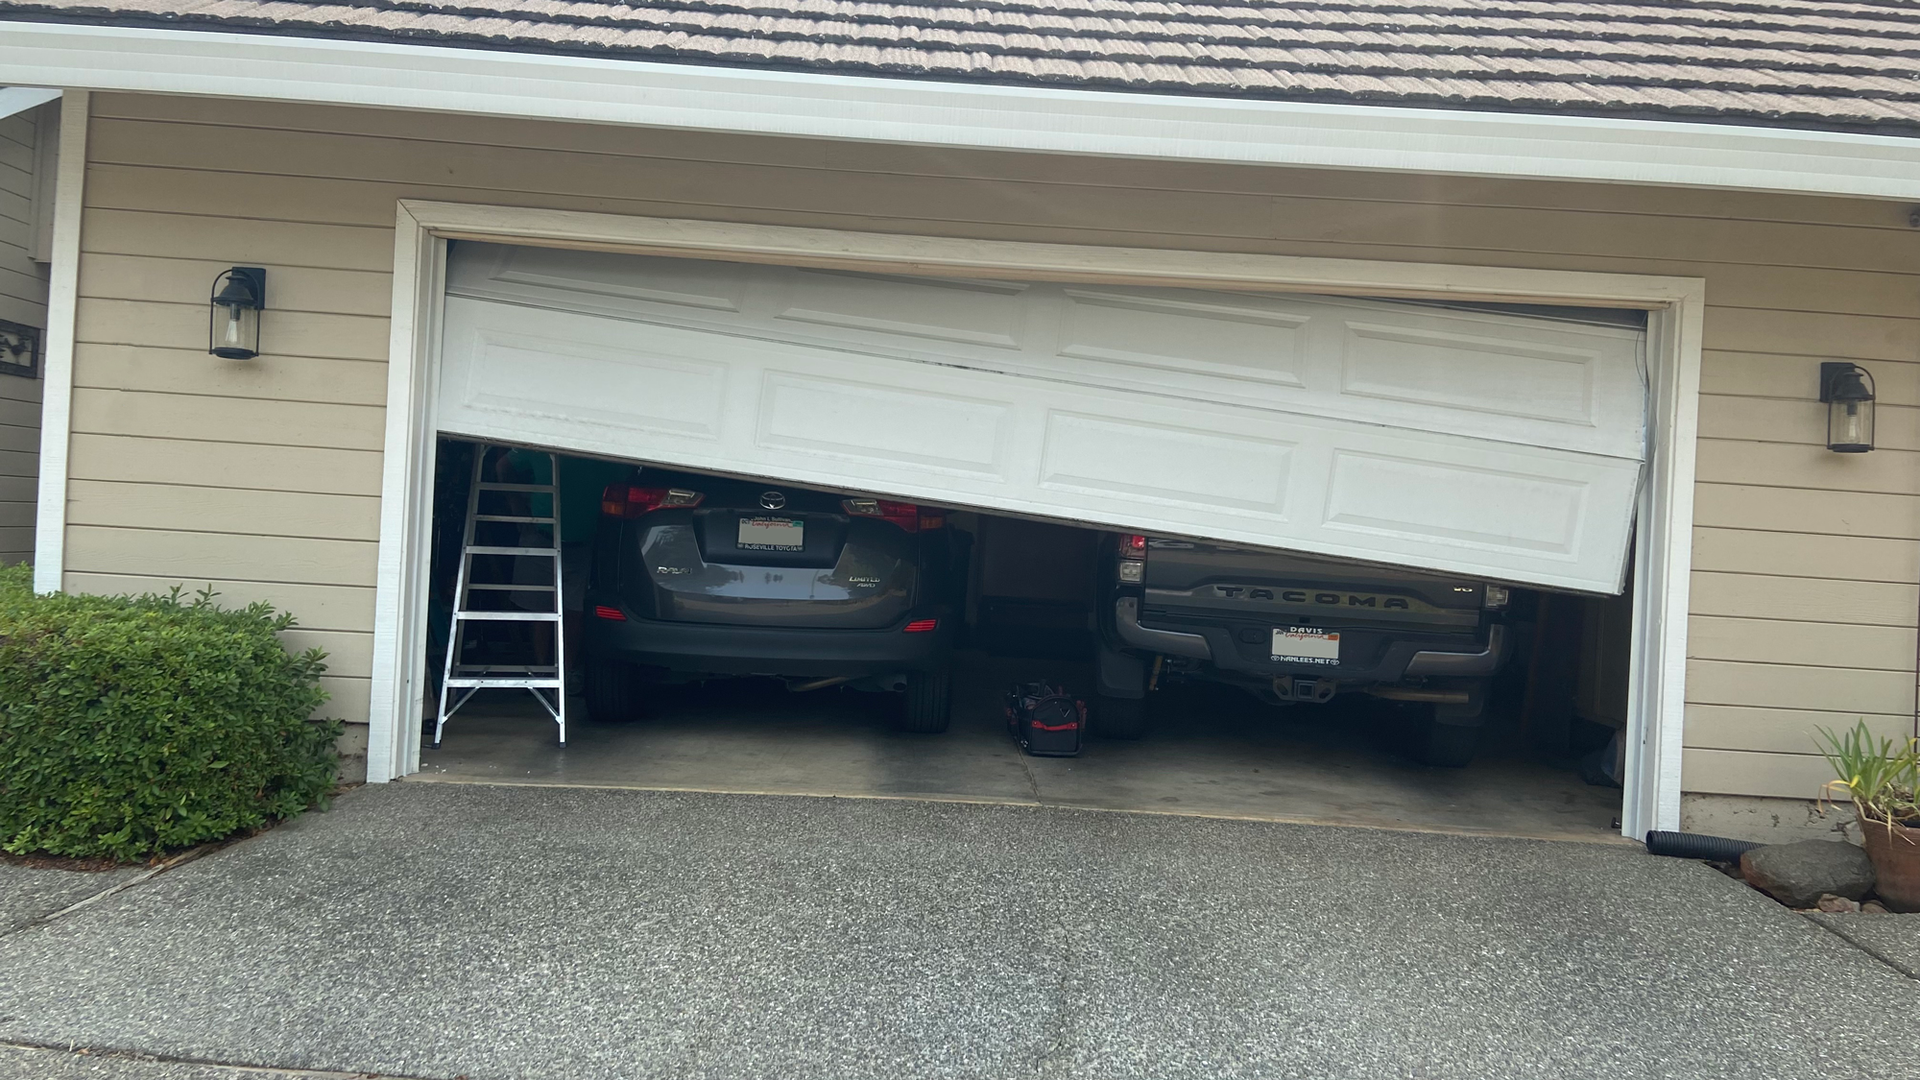 A crashed garage door hanging at an angle trapping two cars inside. 